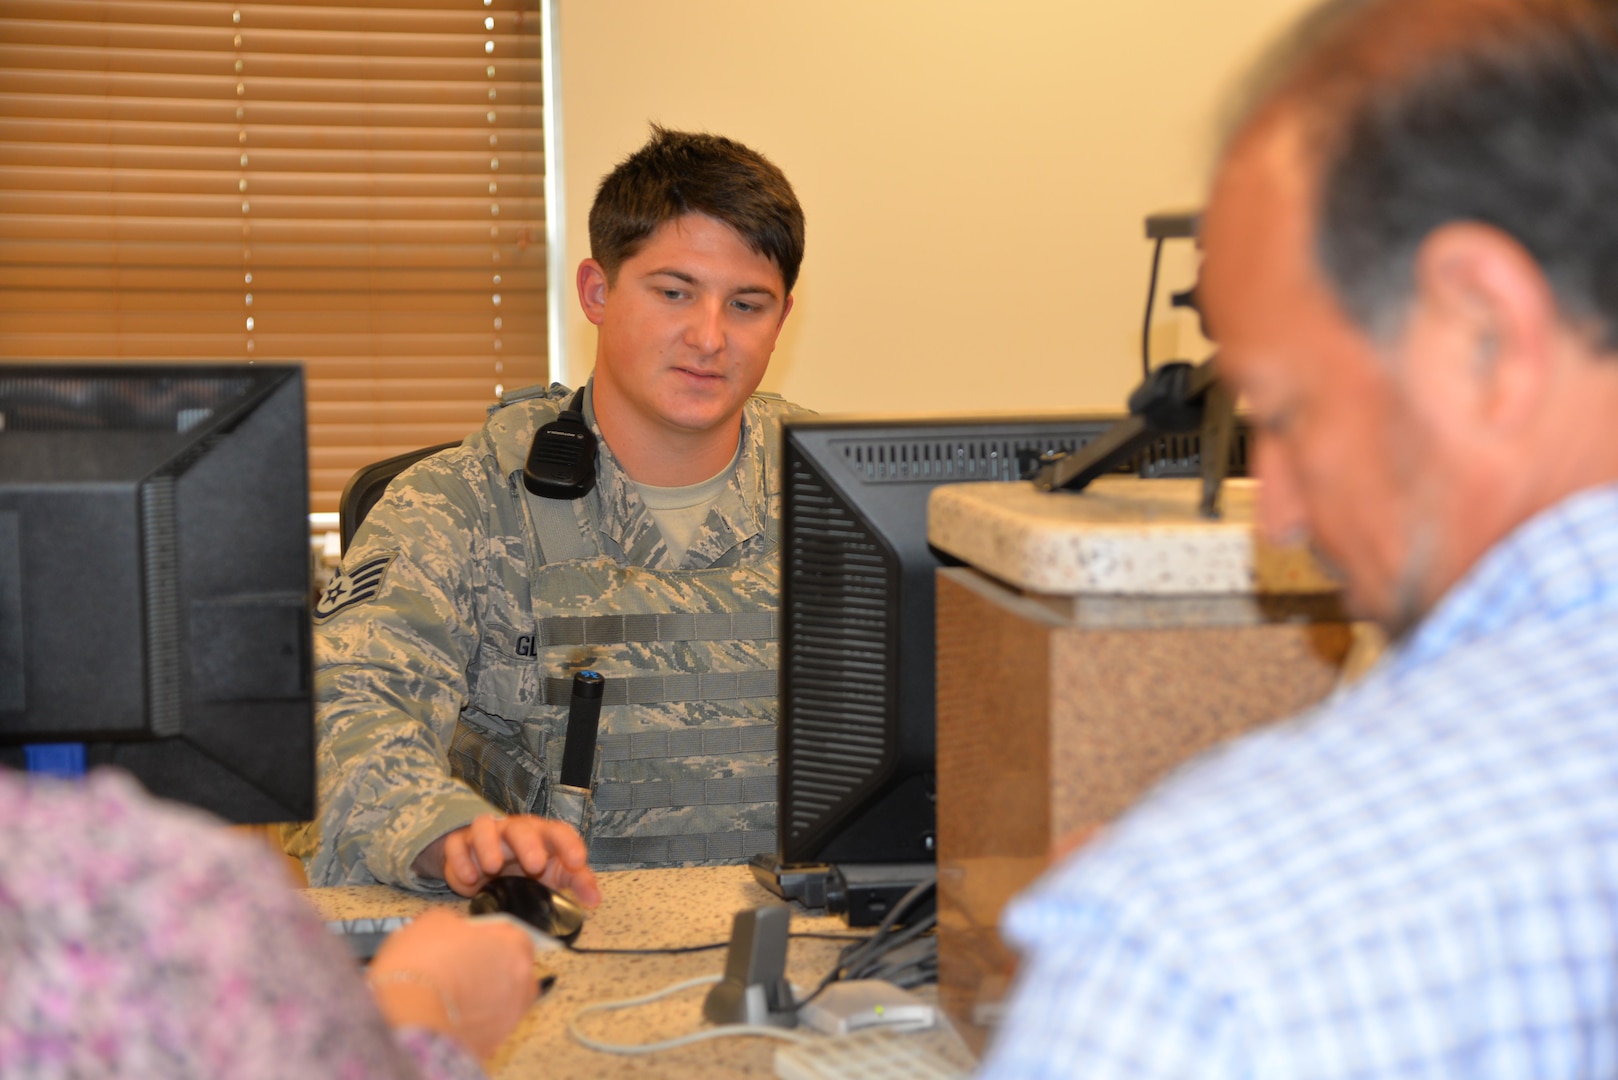 Staff Sgt. Kolton Glasoe, 502nd Security Forces Squadron entry controller, checks a visitor’s ID card at the Joint Base San Antonio-Fort Sam Houston Visitor Control Center. So far for 2015, the JBSA-Fort Sam Houston VCC has served nearly 16,000 customers. The Joint Base San Antonio-Fort Sam Houston Visitor Control Center is one of several facilities that play a vital first-defense role in the security of installation members, missions and assets across JBSA through a system that ensures those who could threaten that environment are denied base access. (U.S. Air Force photo by Steve Eliott/Released)